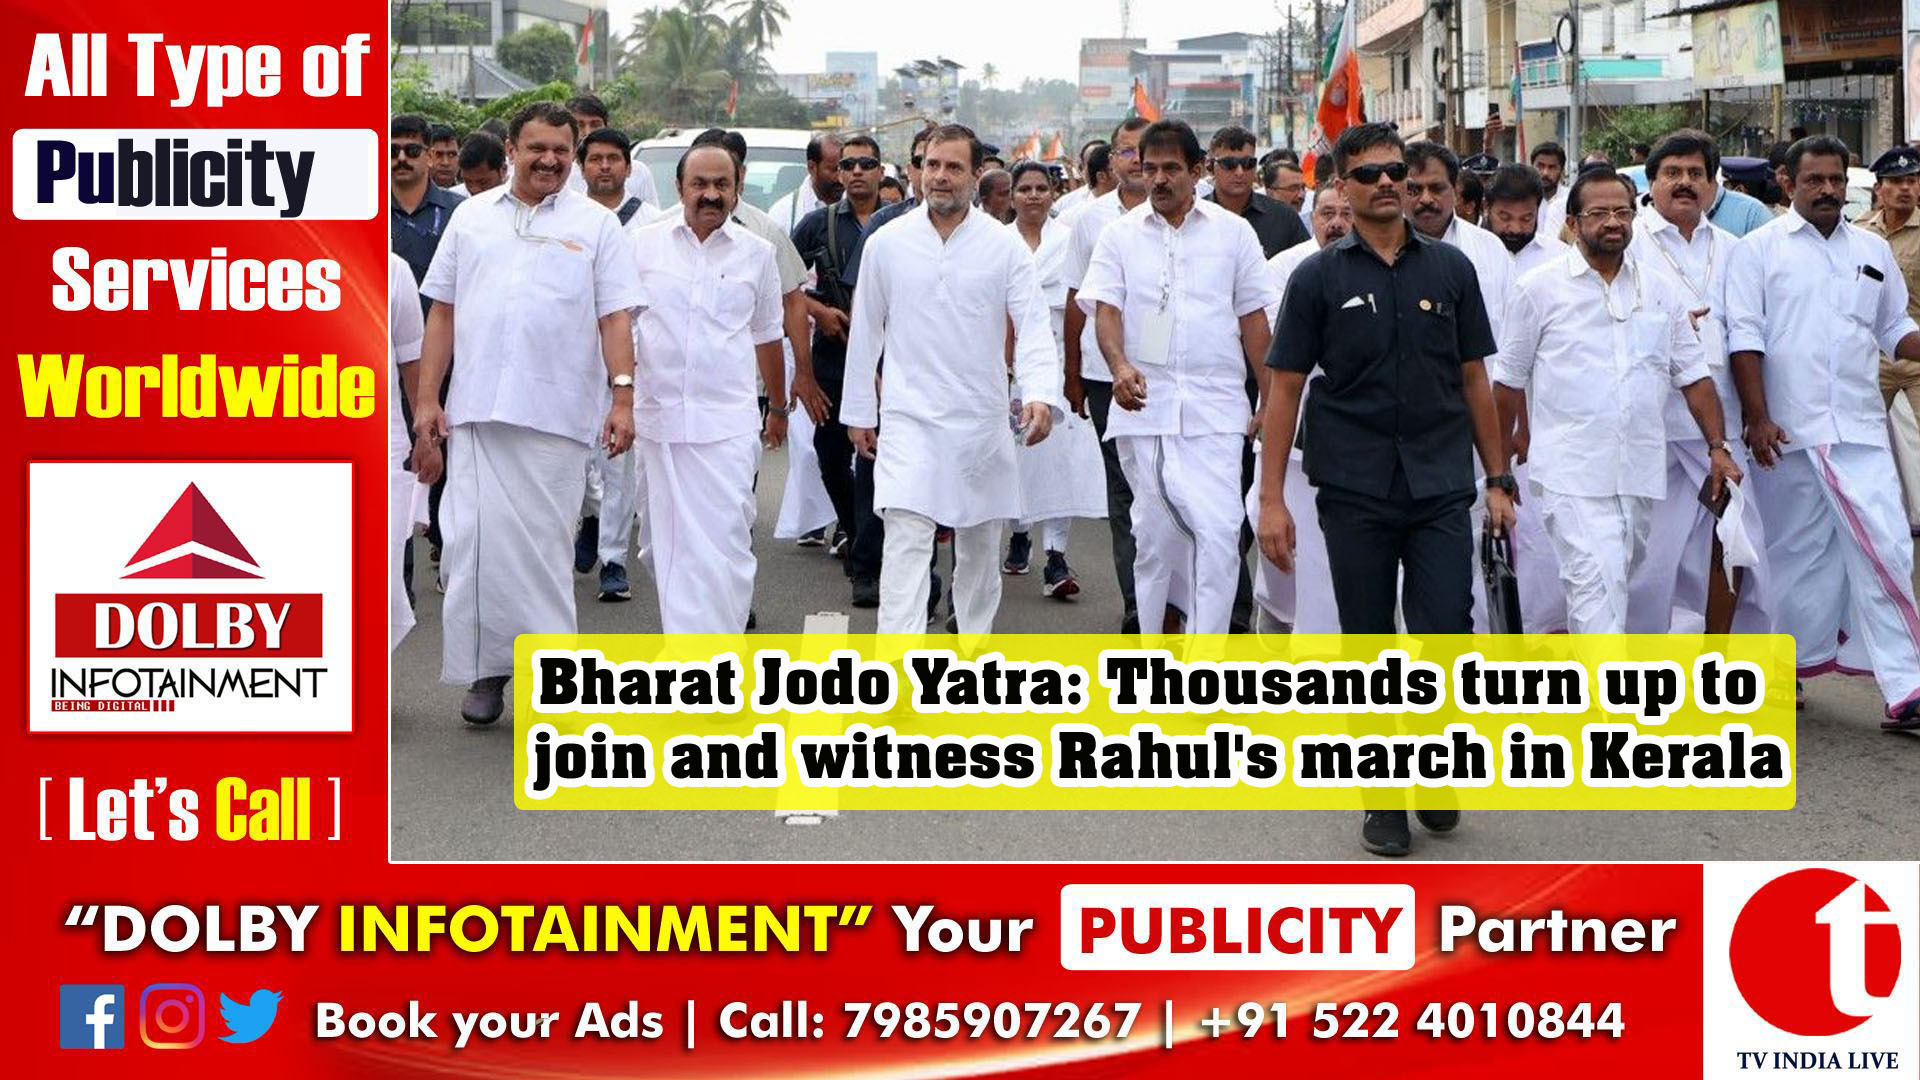 Bharat Jodo Yatra: Thousands turn up to join and witness Rahul's march in Kerala